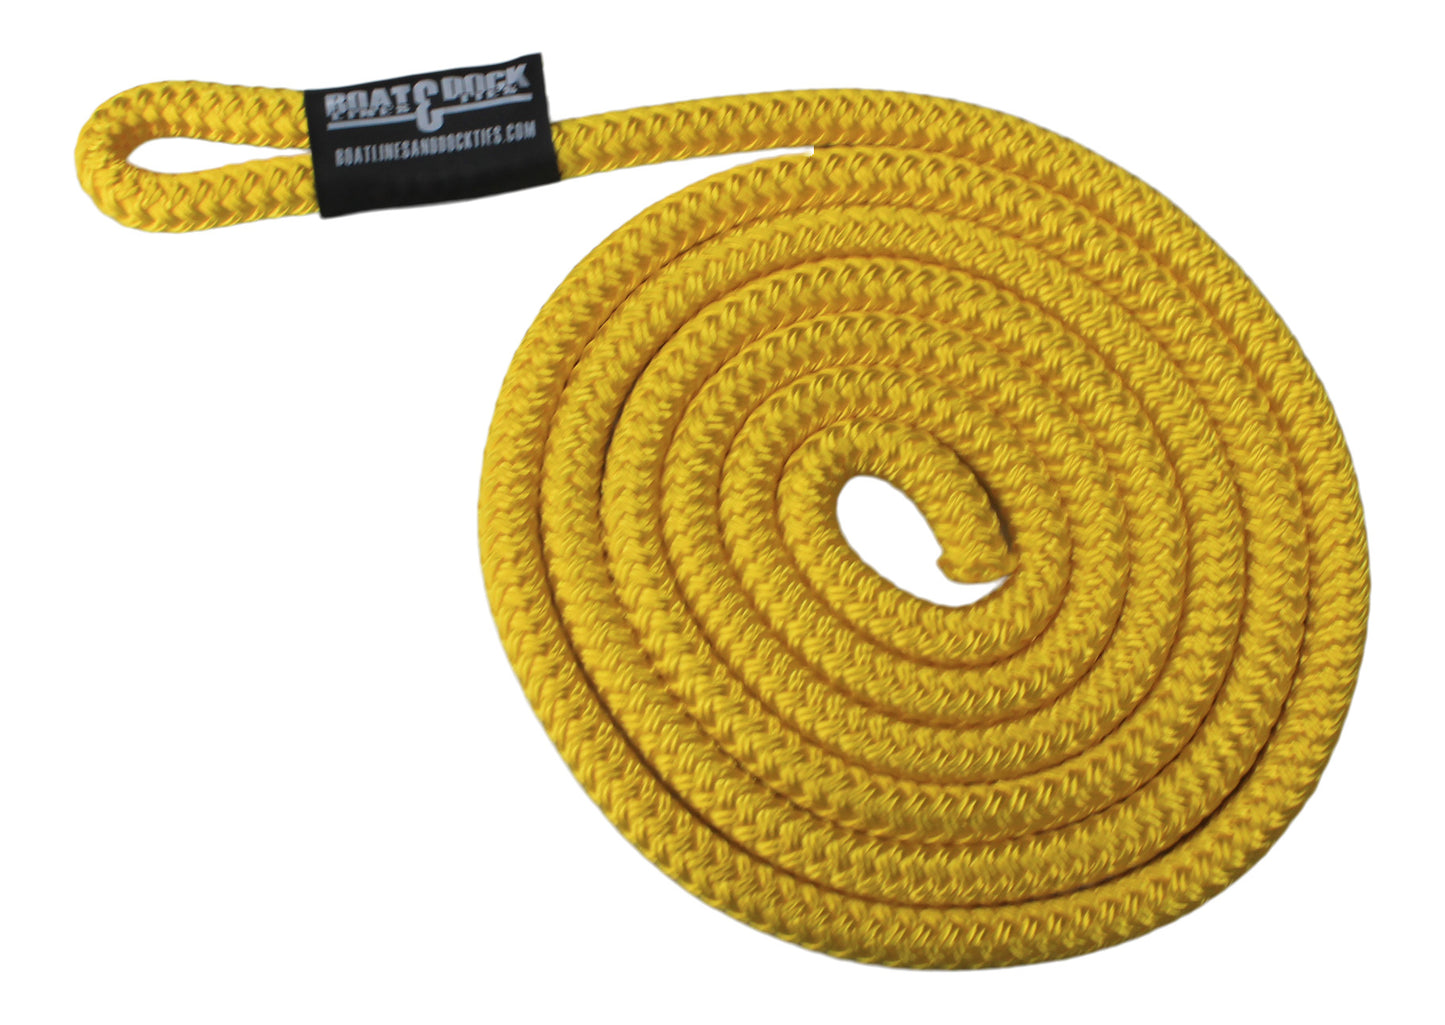 Double Braided Nylon Rope Small Loop Fender Bumper Line, Made in USA- 2 pack - Boat Lines & Dock Ties Boat Lines & Dock Ties